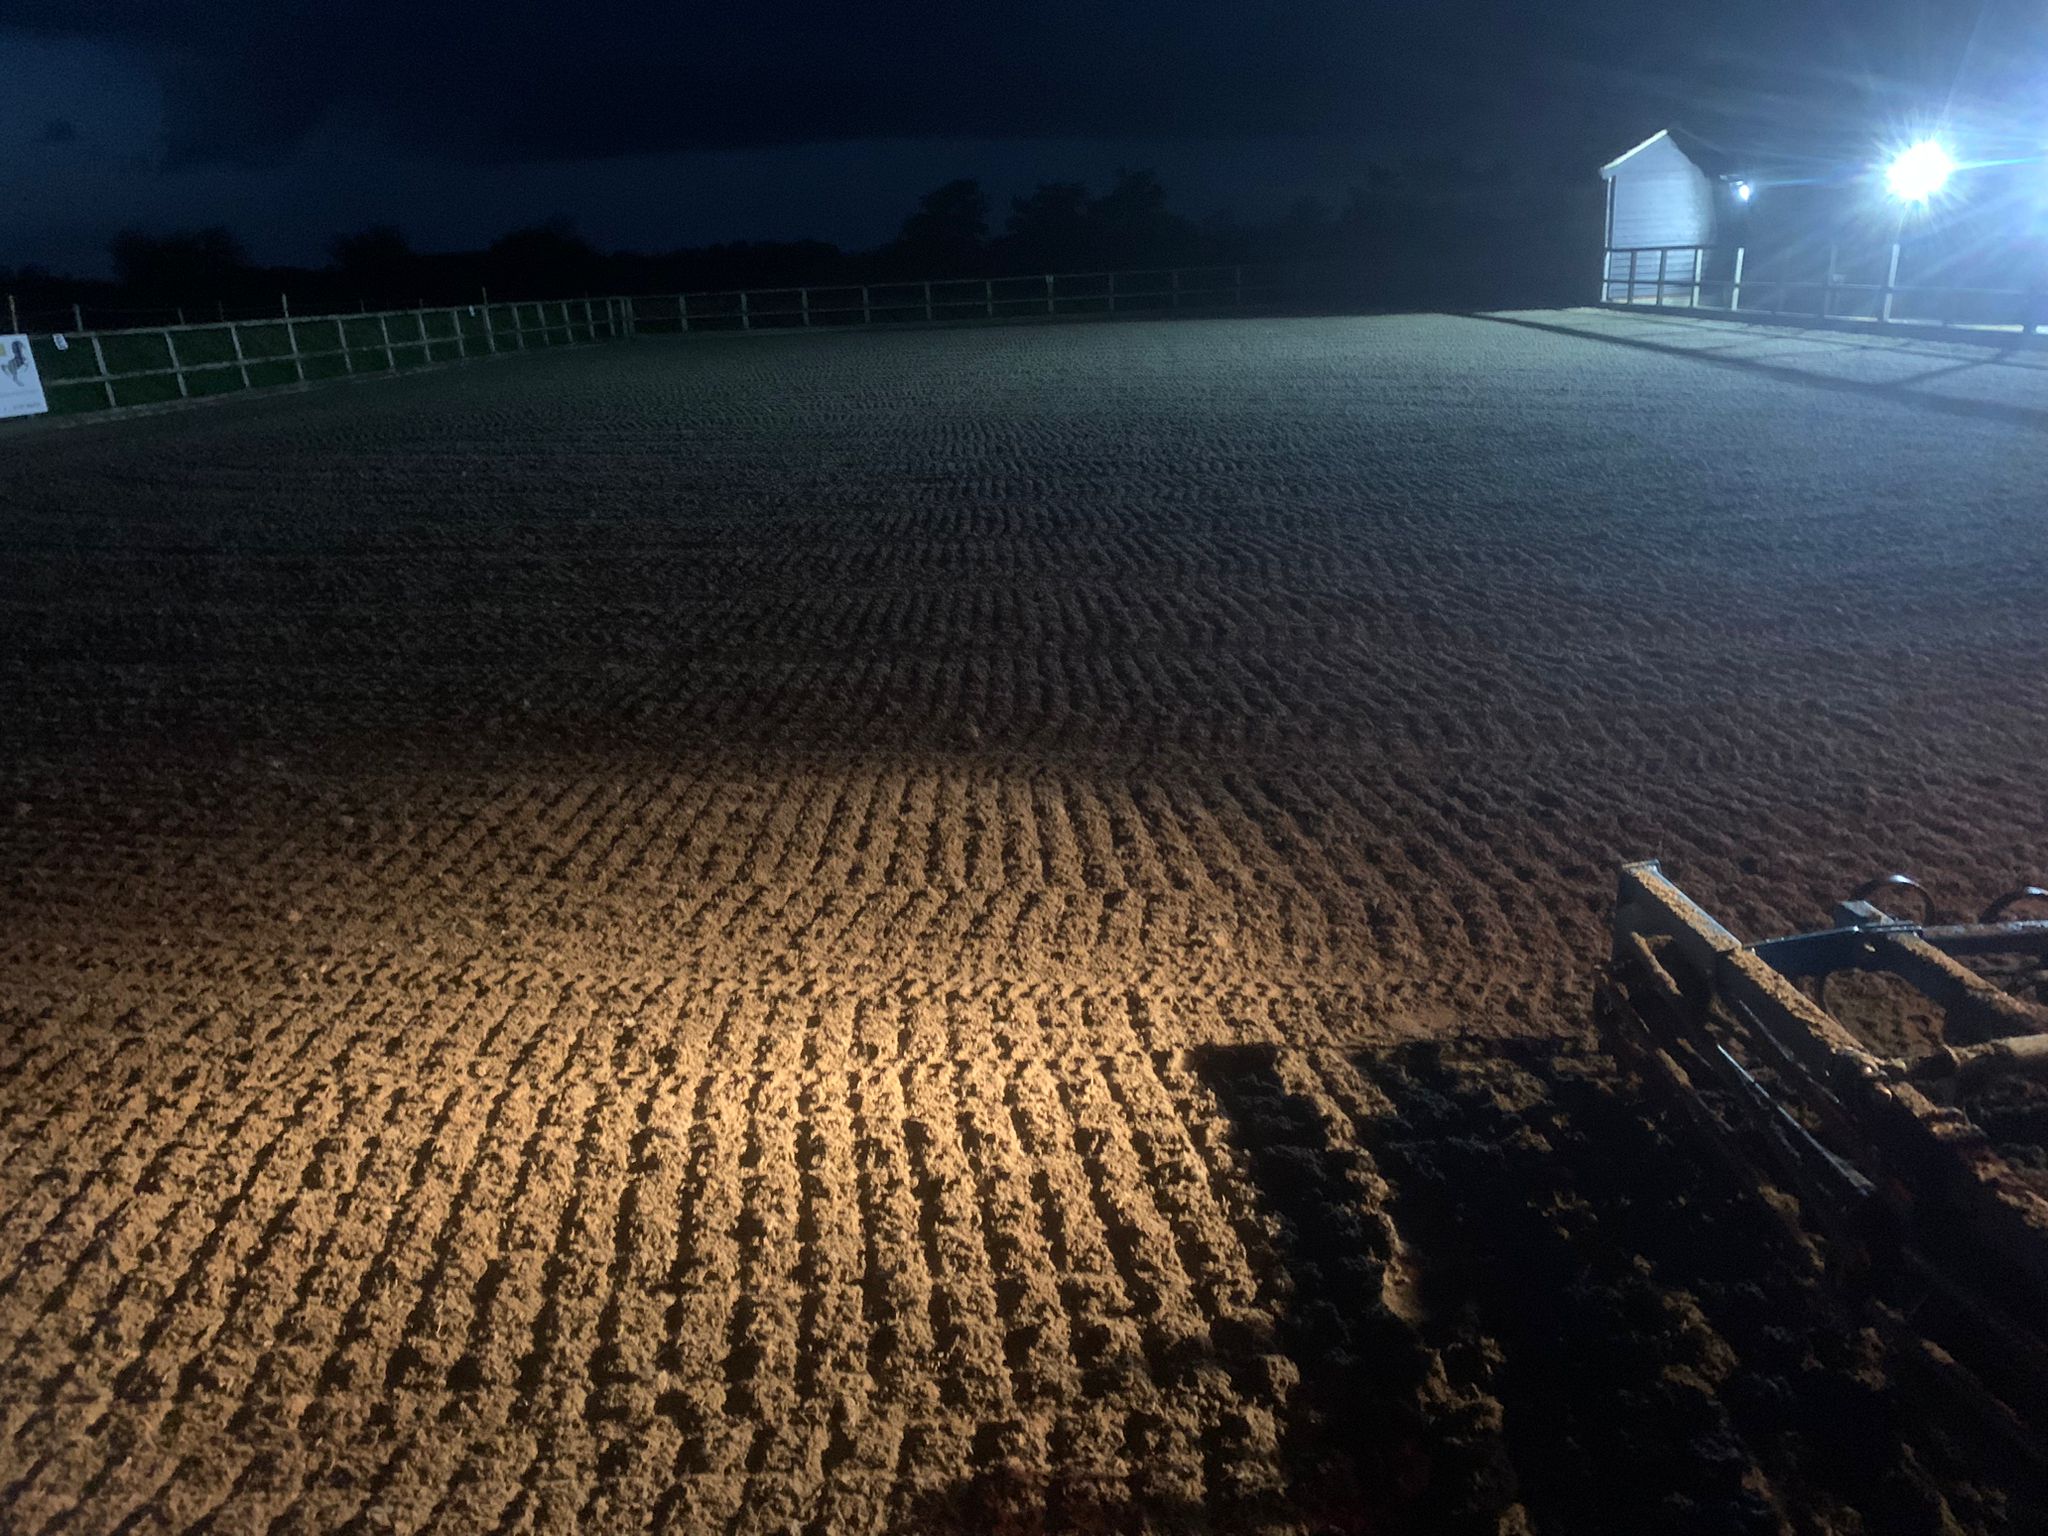 Equestrian surface in the dark